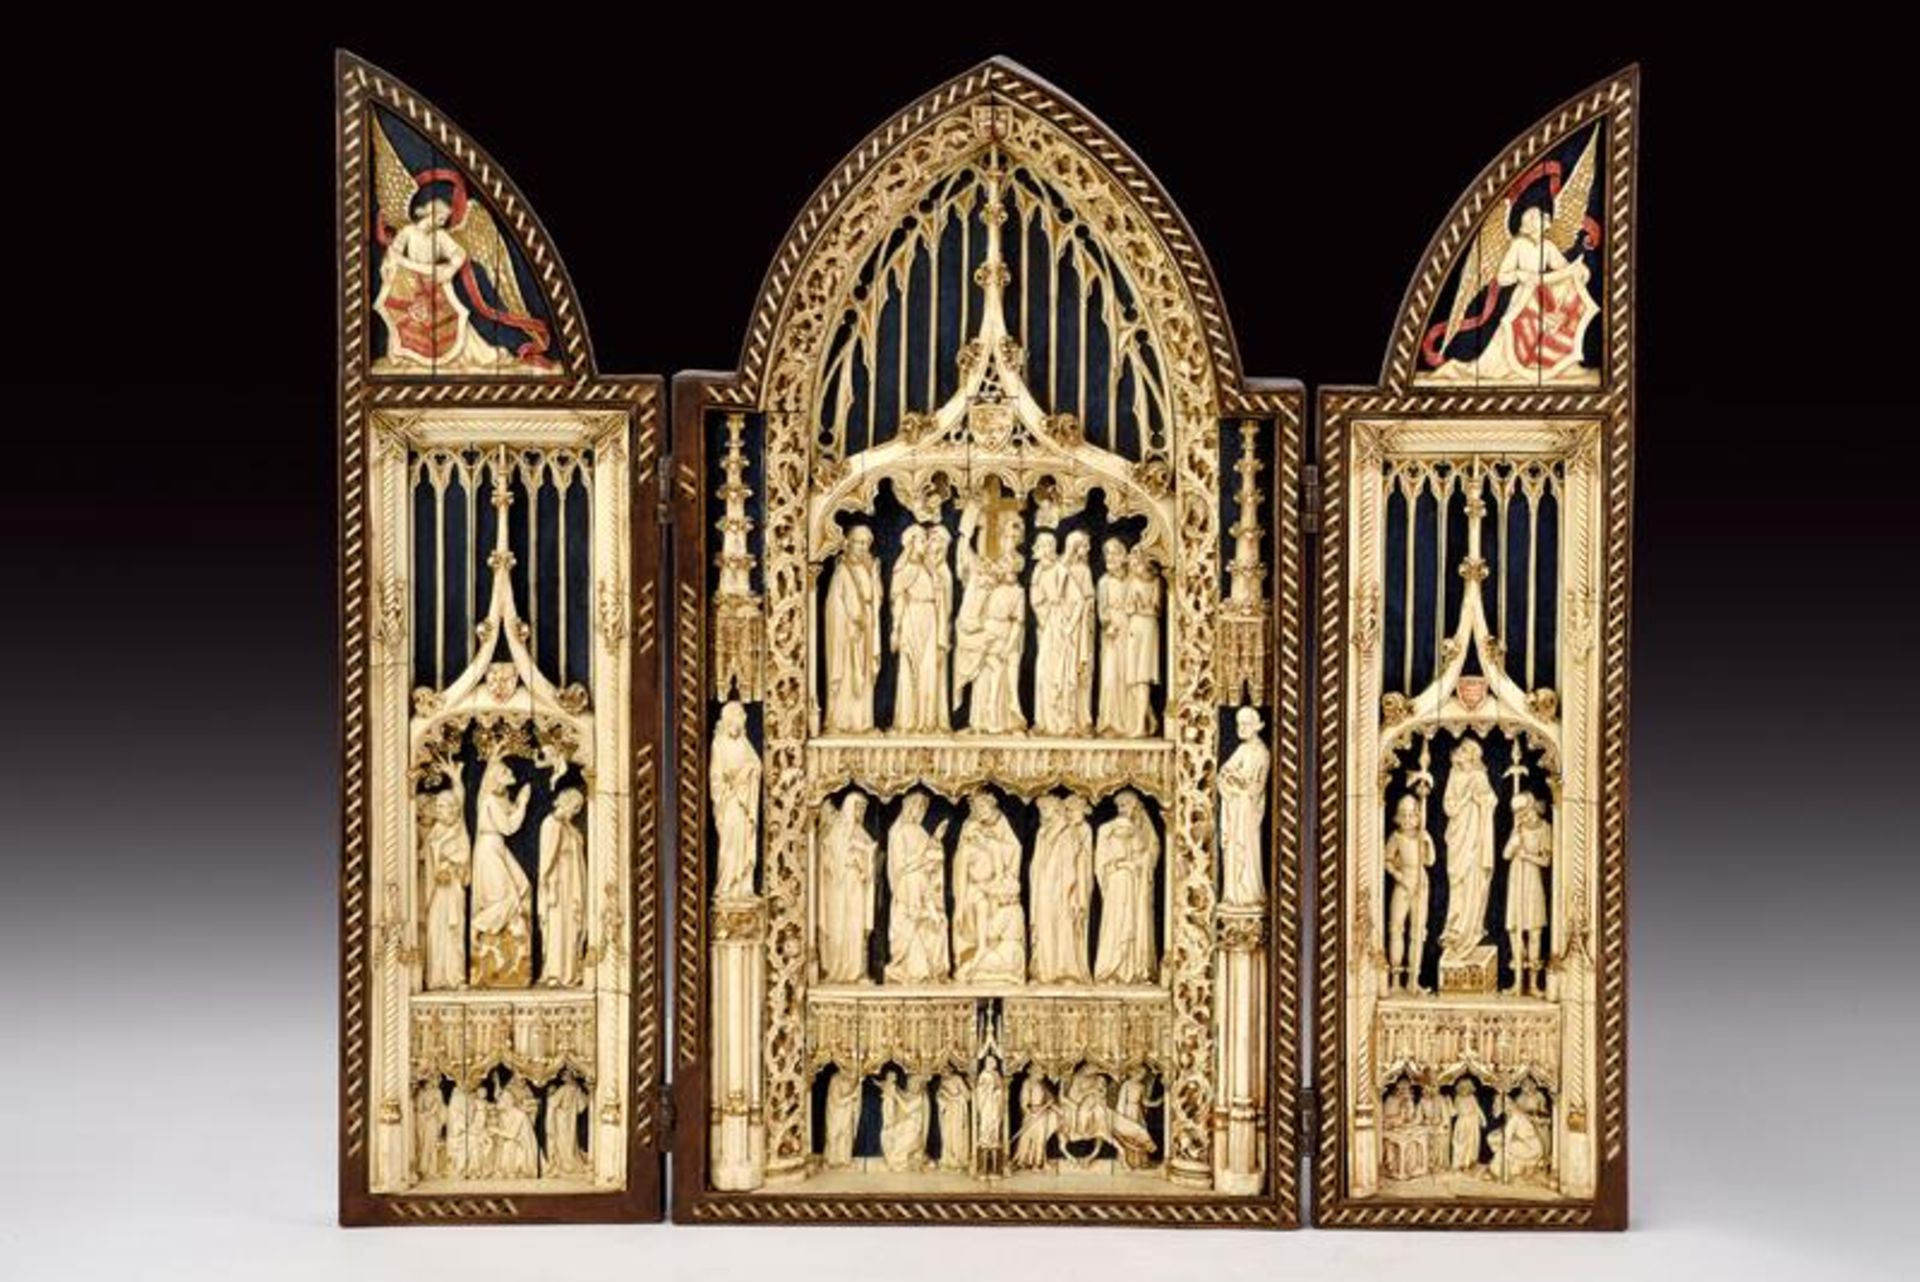 An extraordinary sculpted triptych with scenes from Christ's life